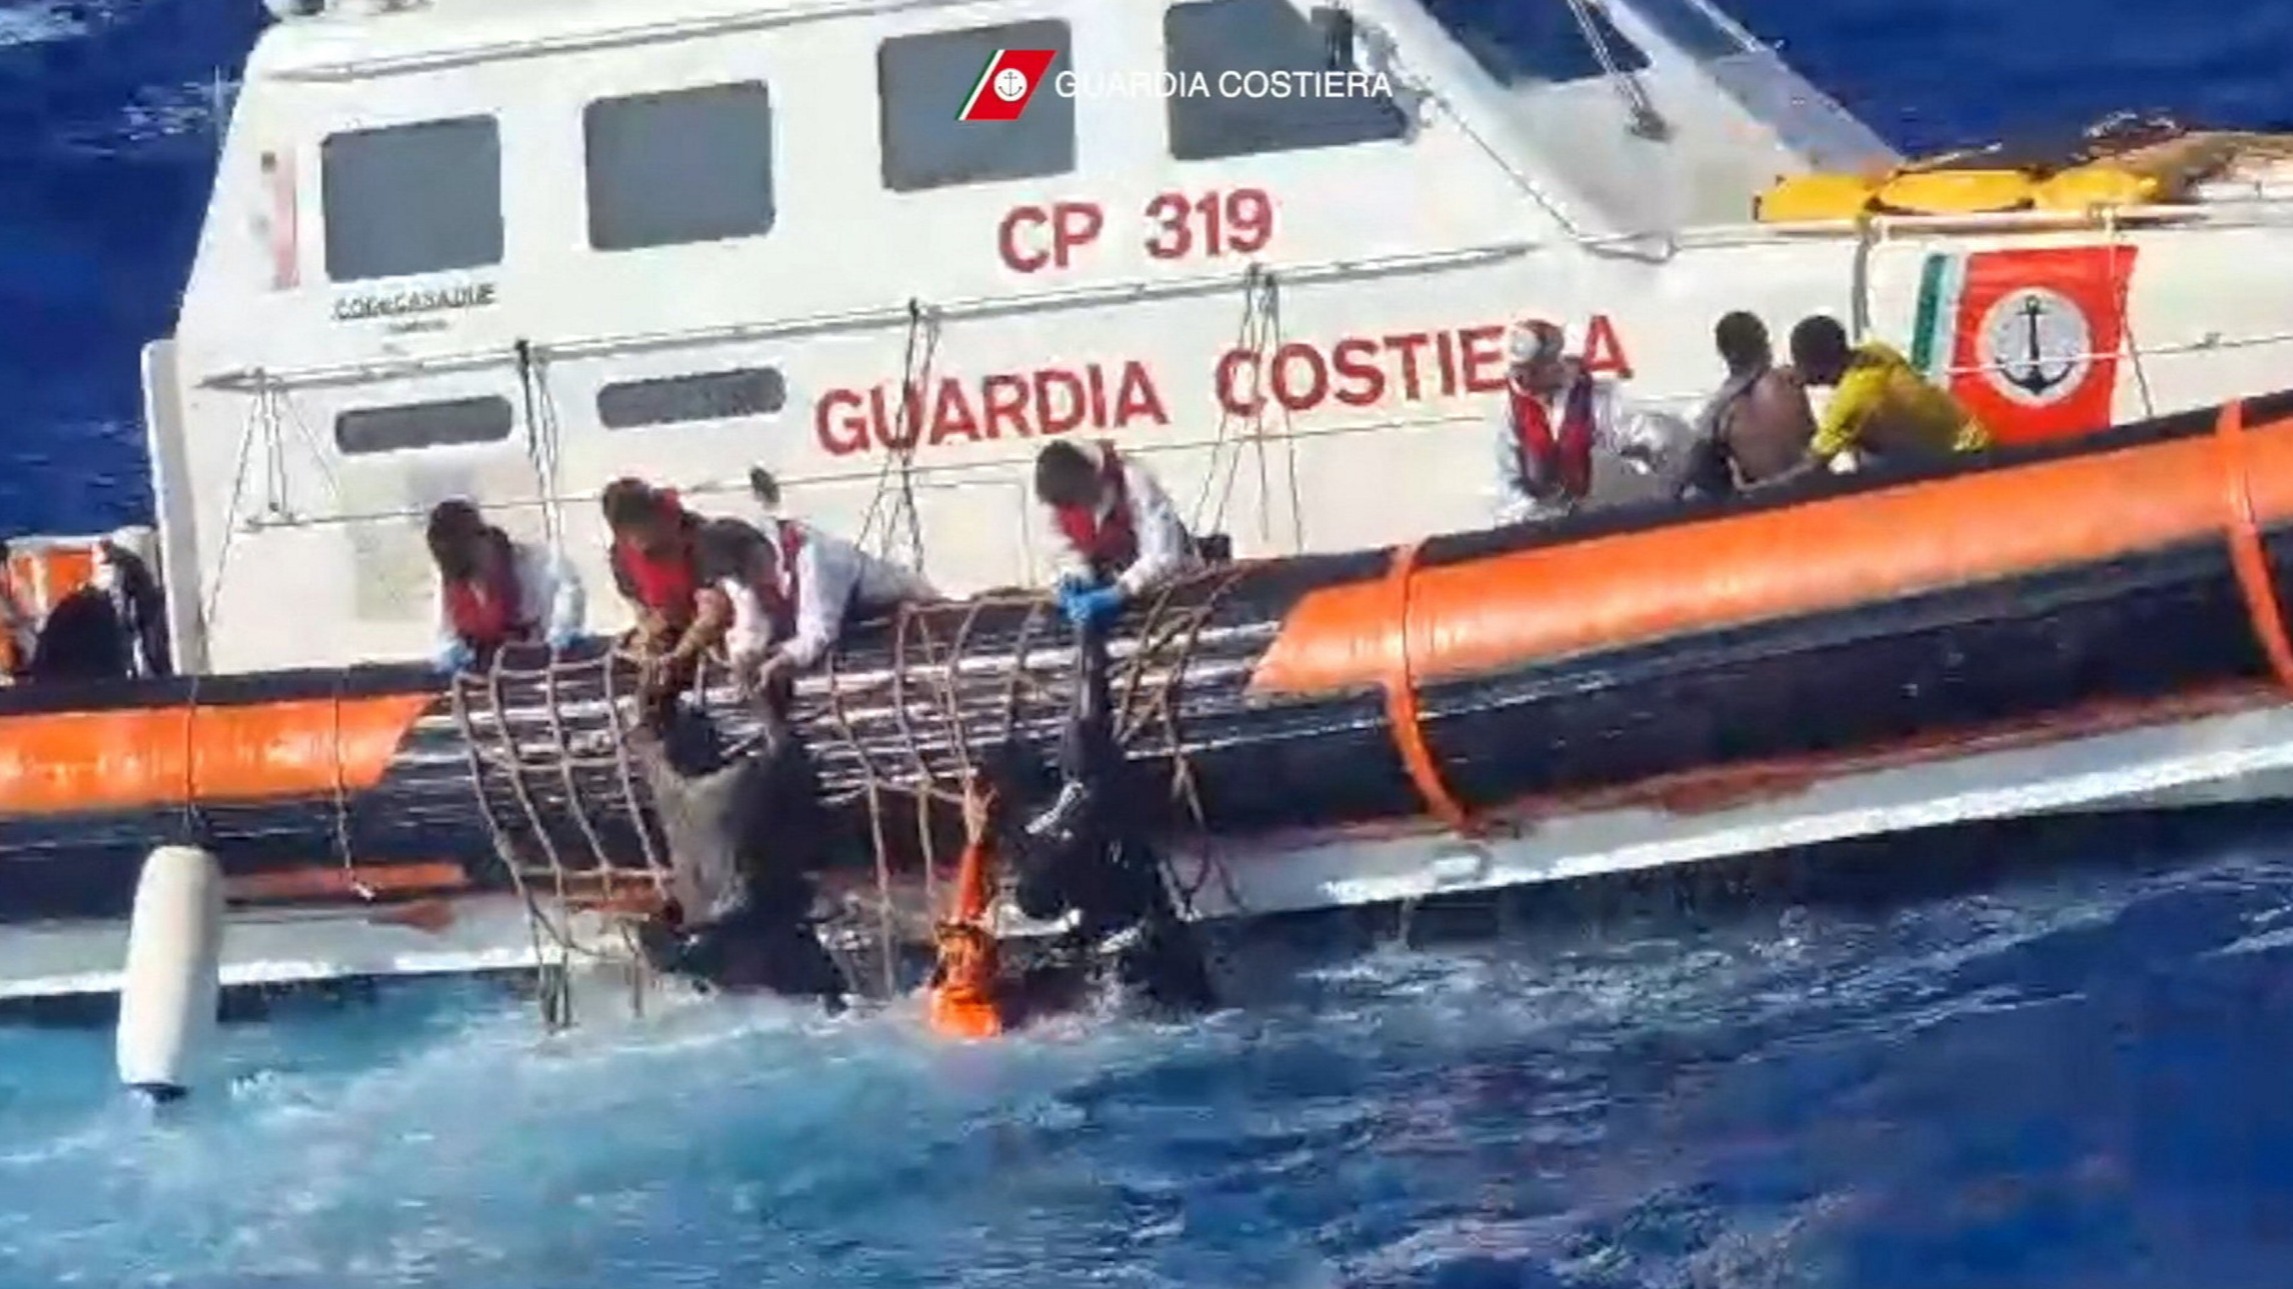 4 survivors who departed from Tunisia claim that 41 migrants perished in the migrant shipwreck.